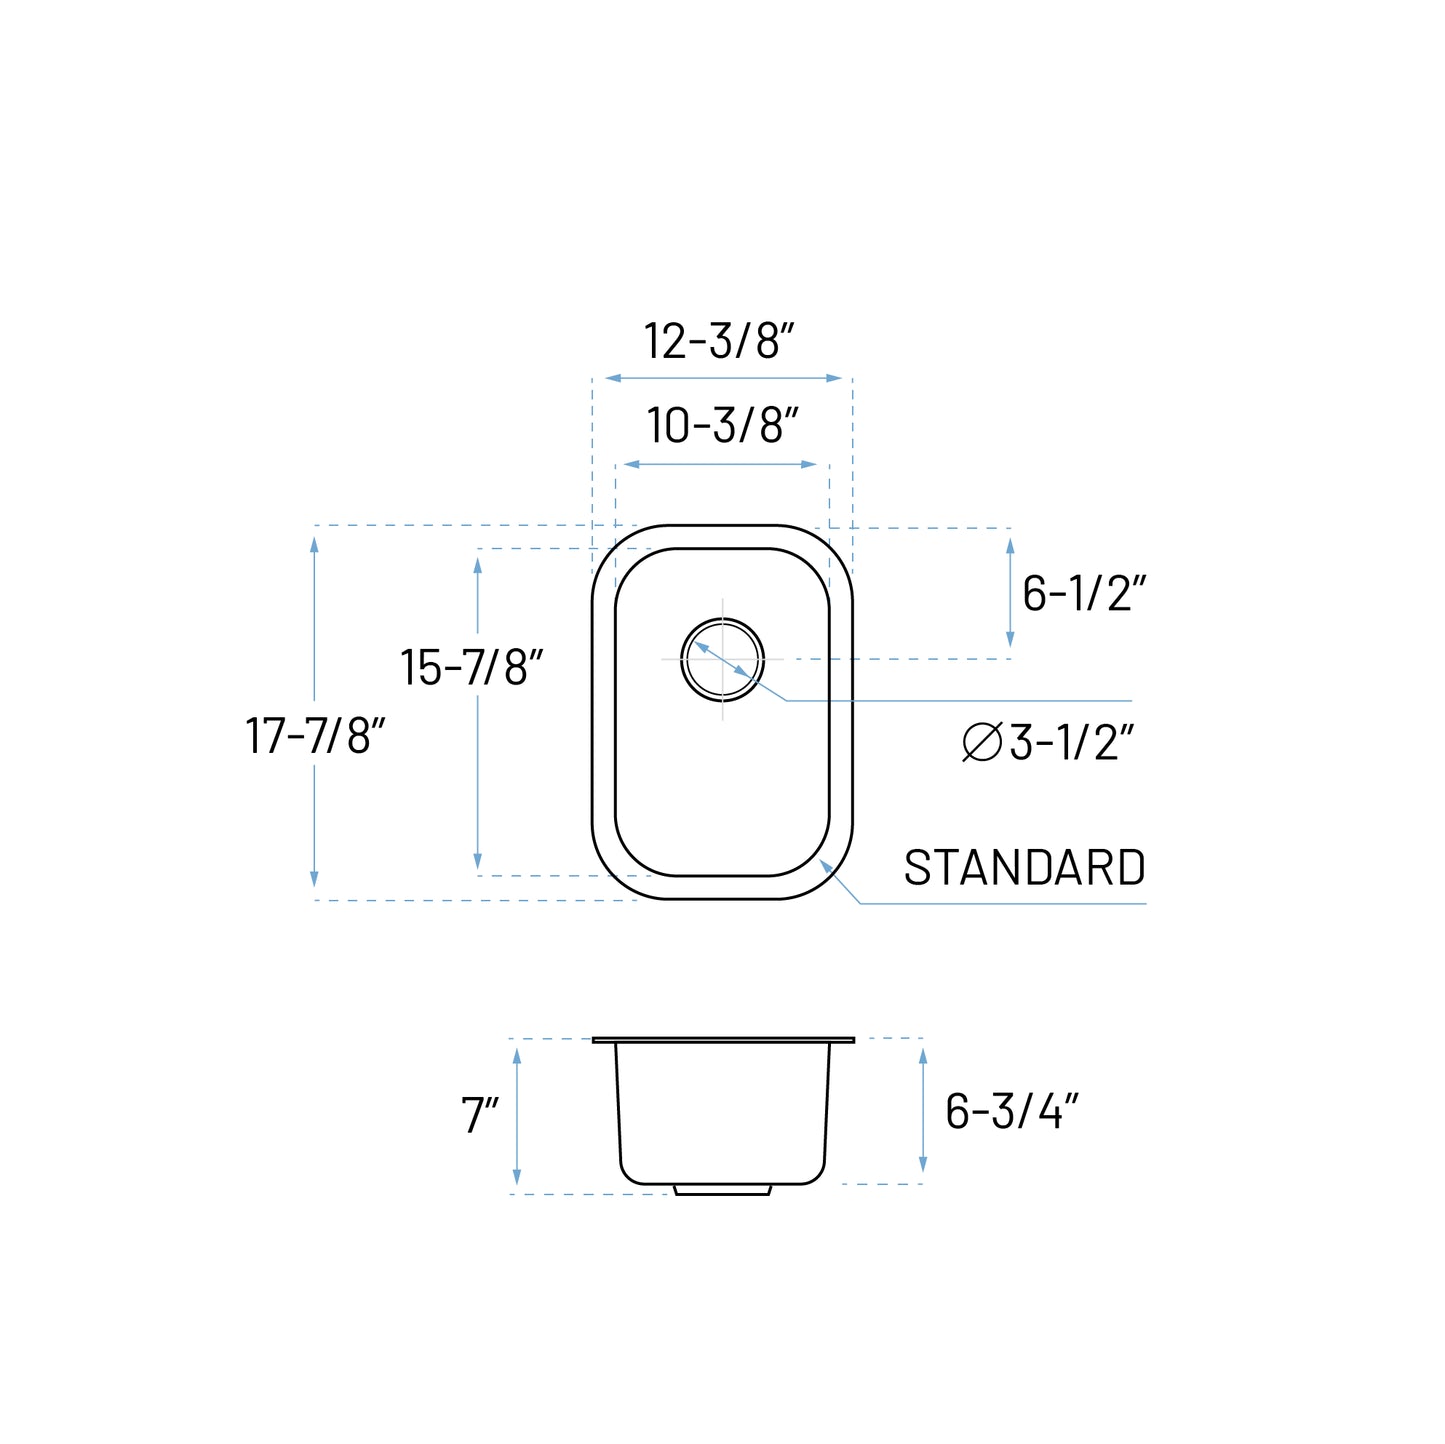 Technical Drawing of Undermount Bar Sink